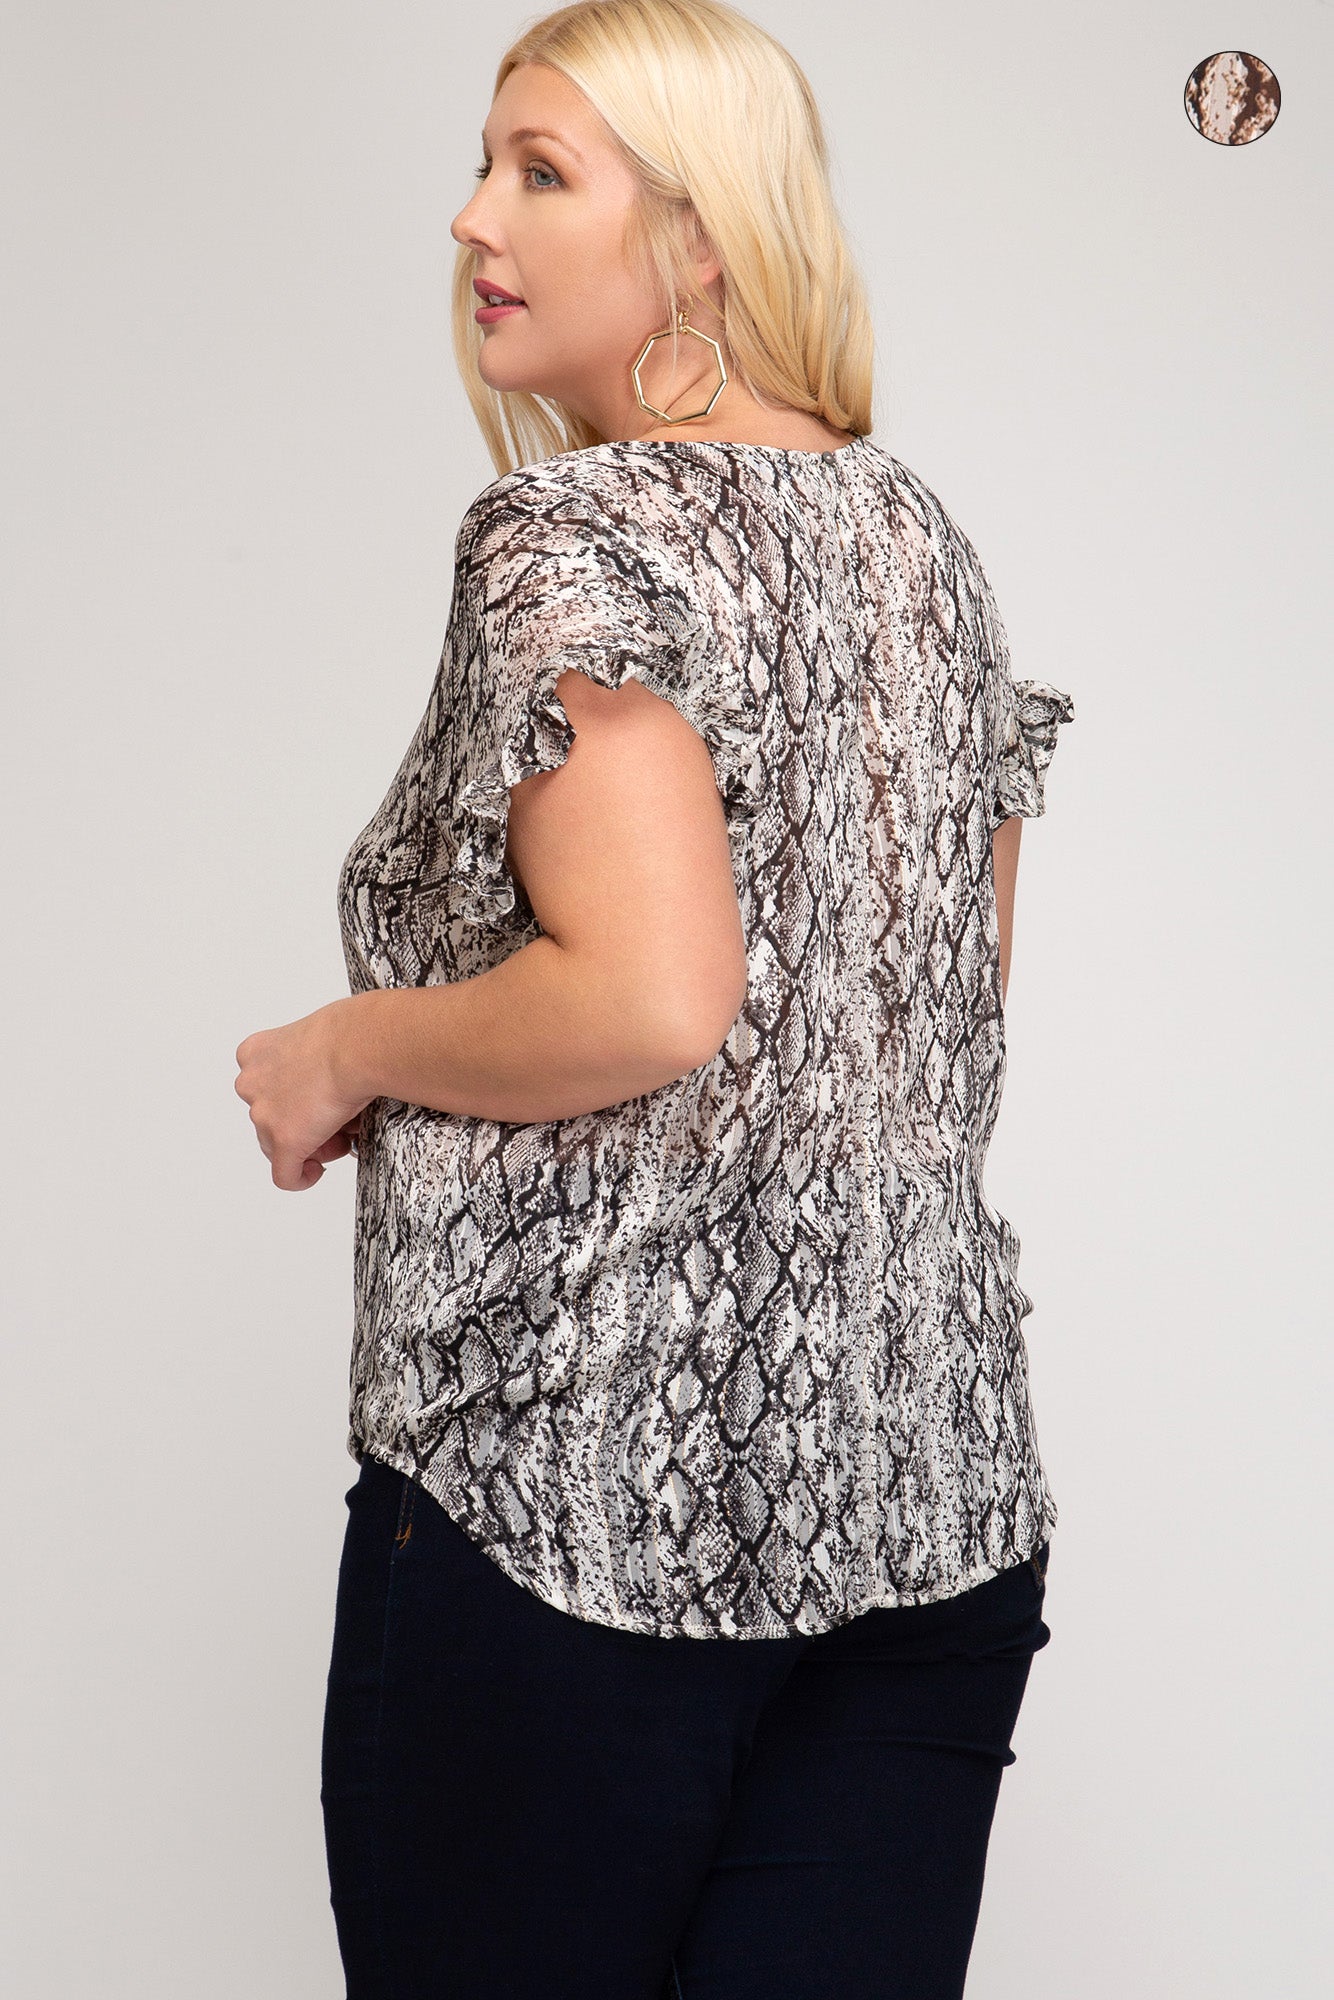 Laura Snake Print Top (PLUS) - Corinne an Affordable Women's Clothing Boutique in the US USA